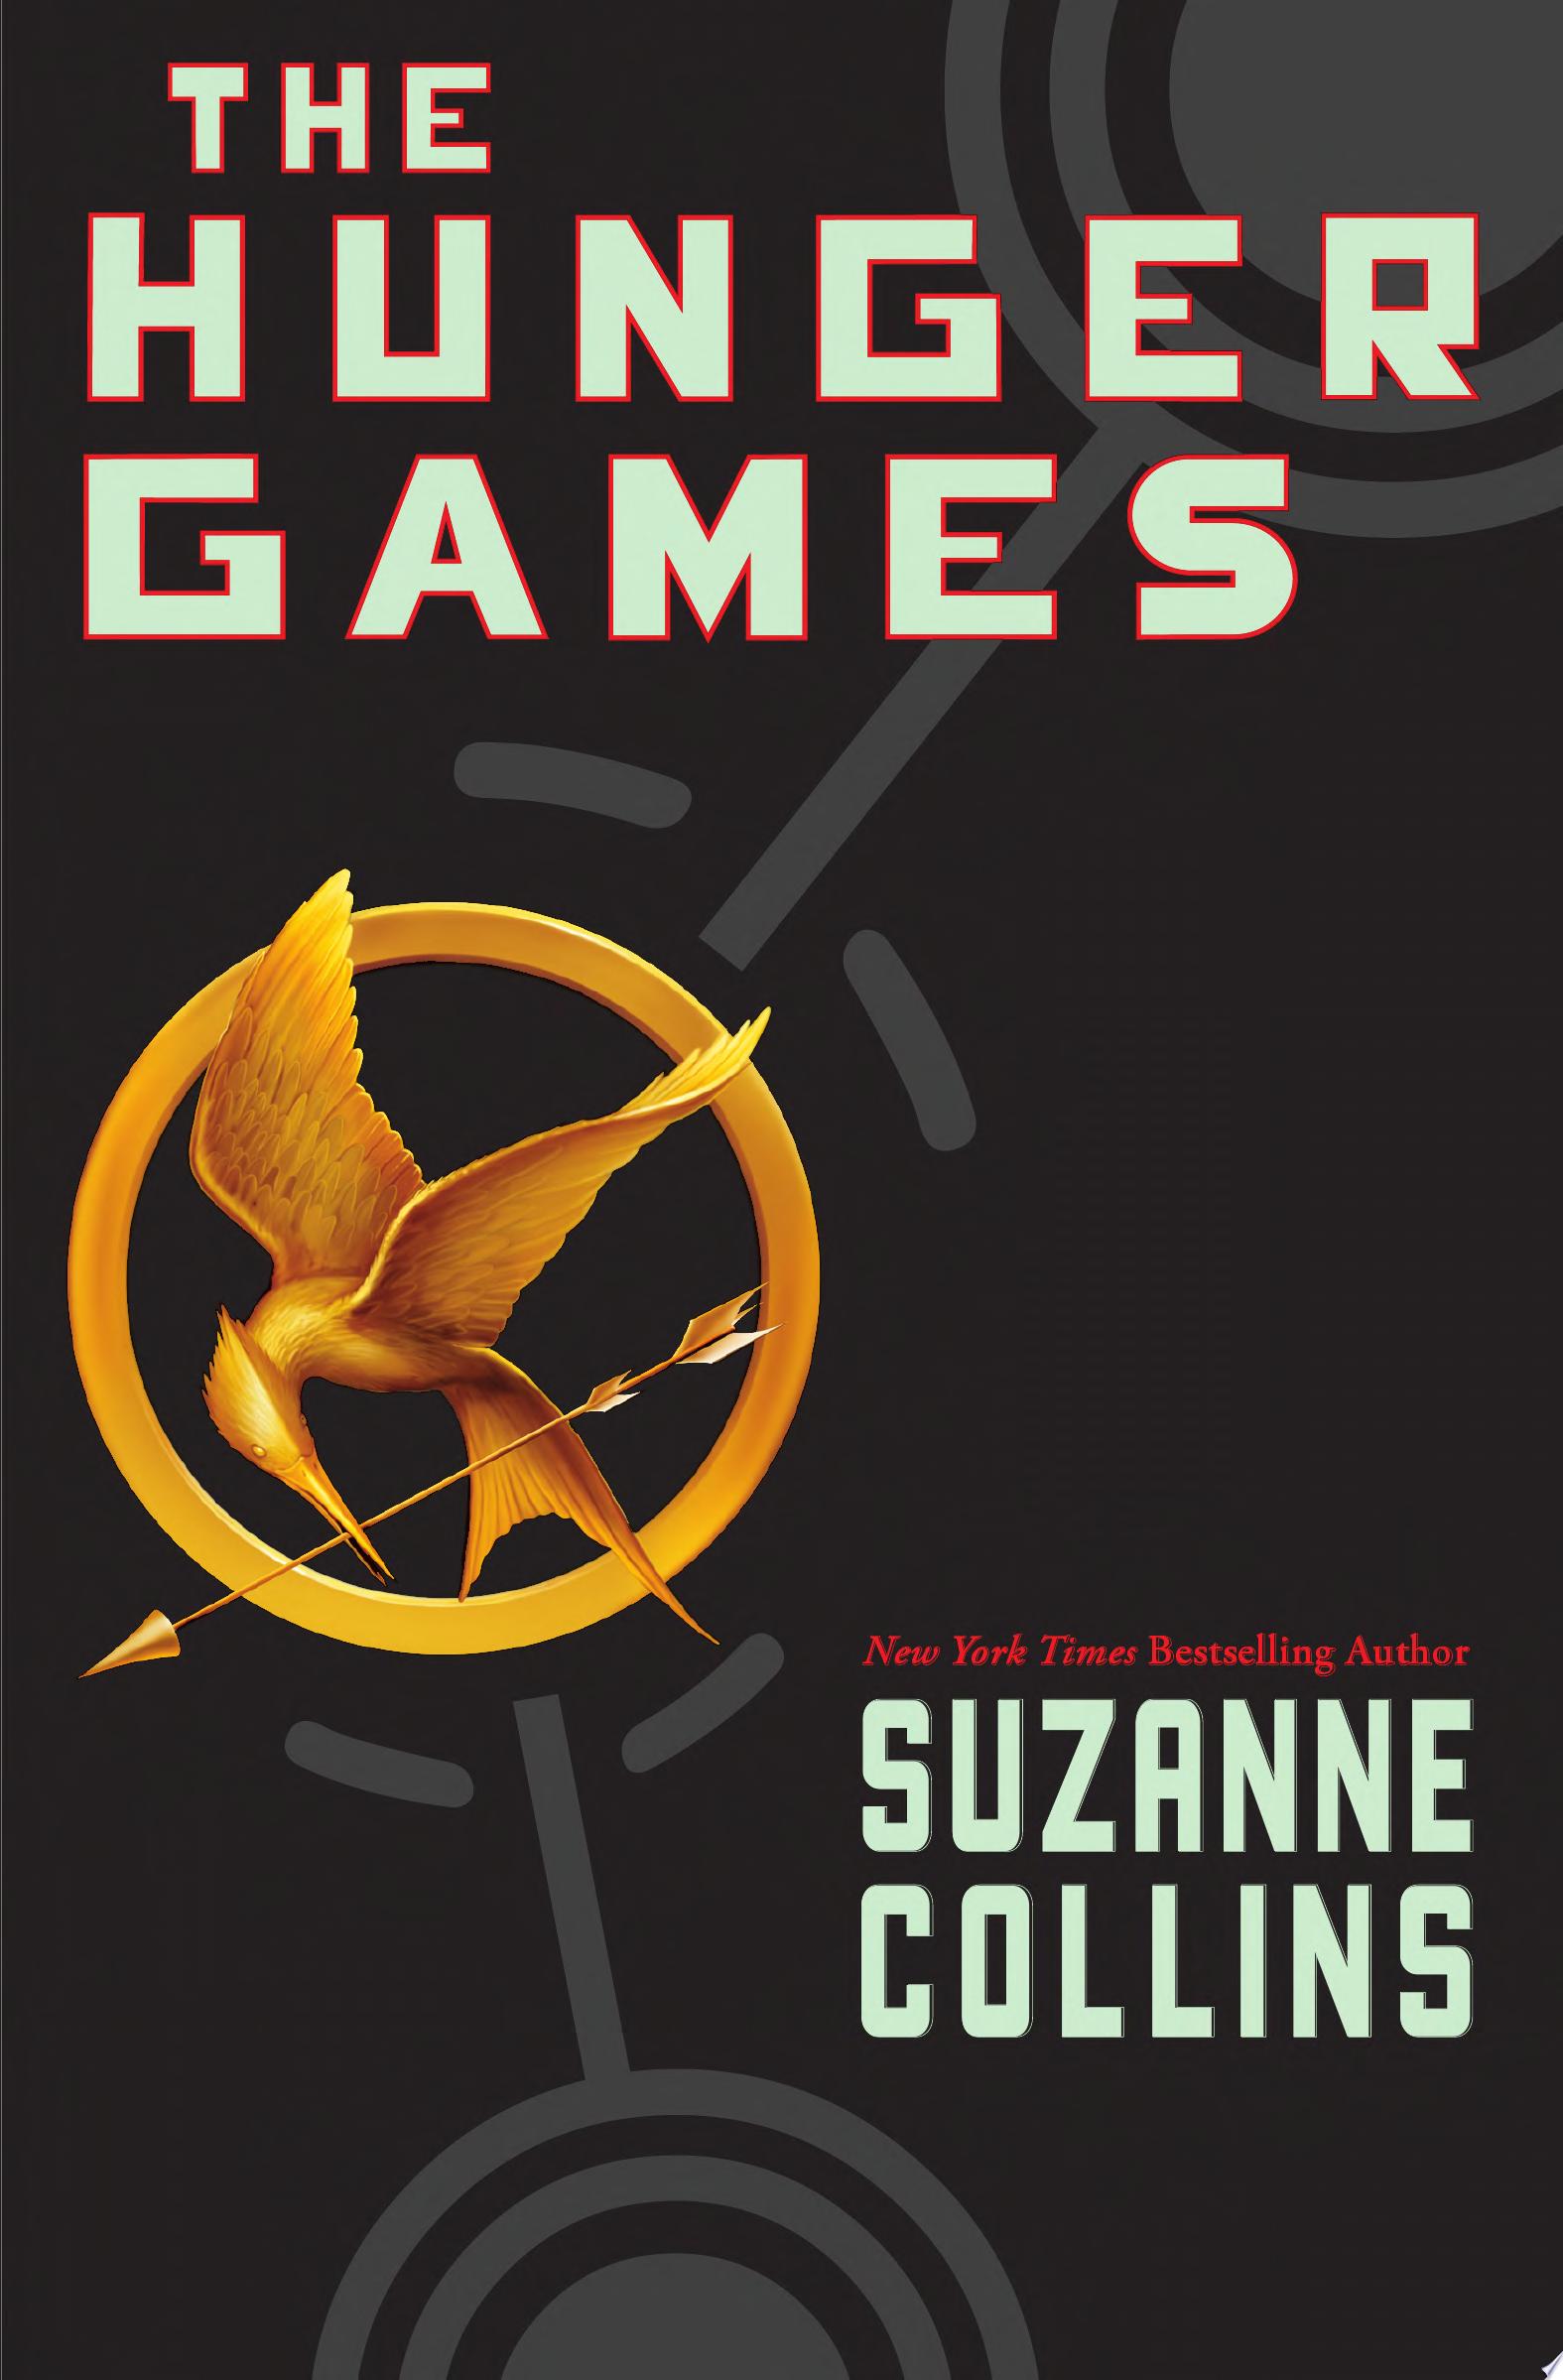 Image for "The Hunger Games"